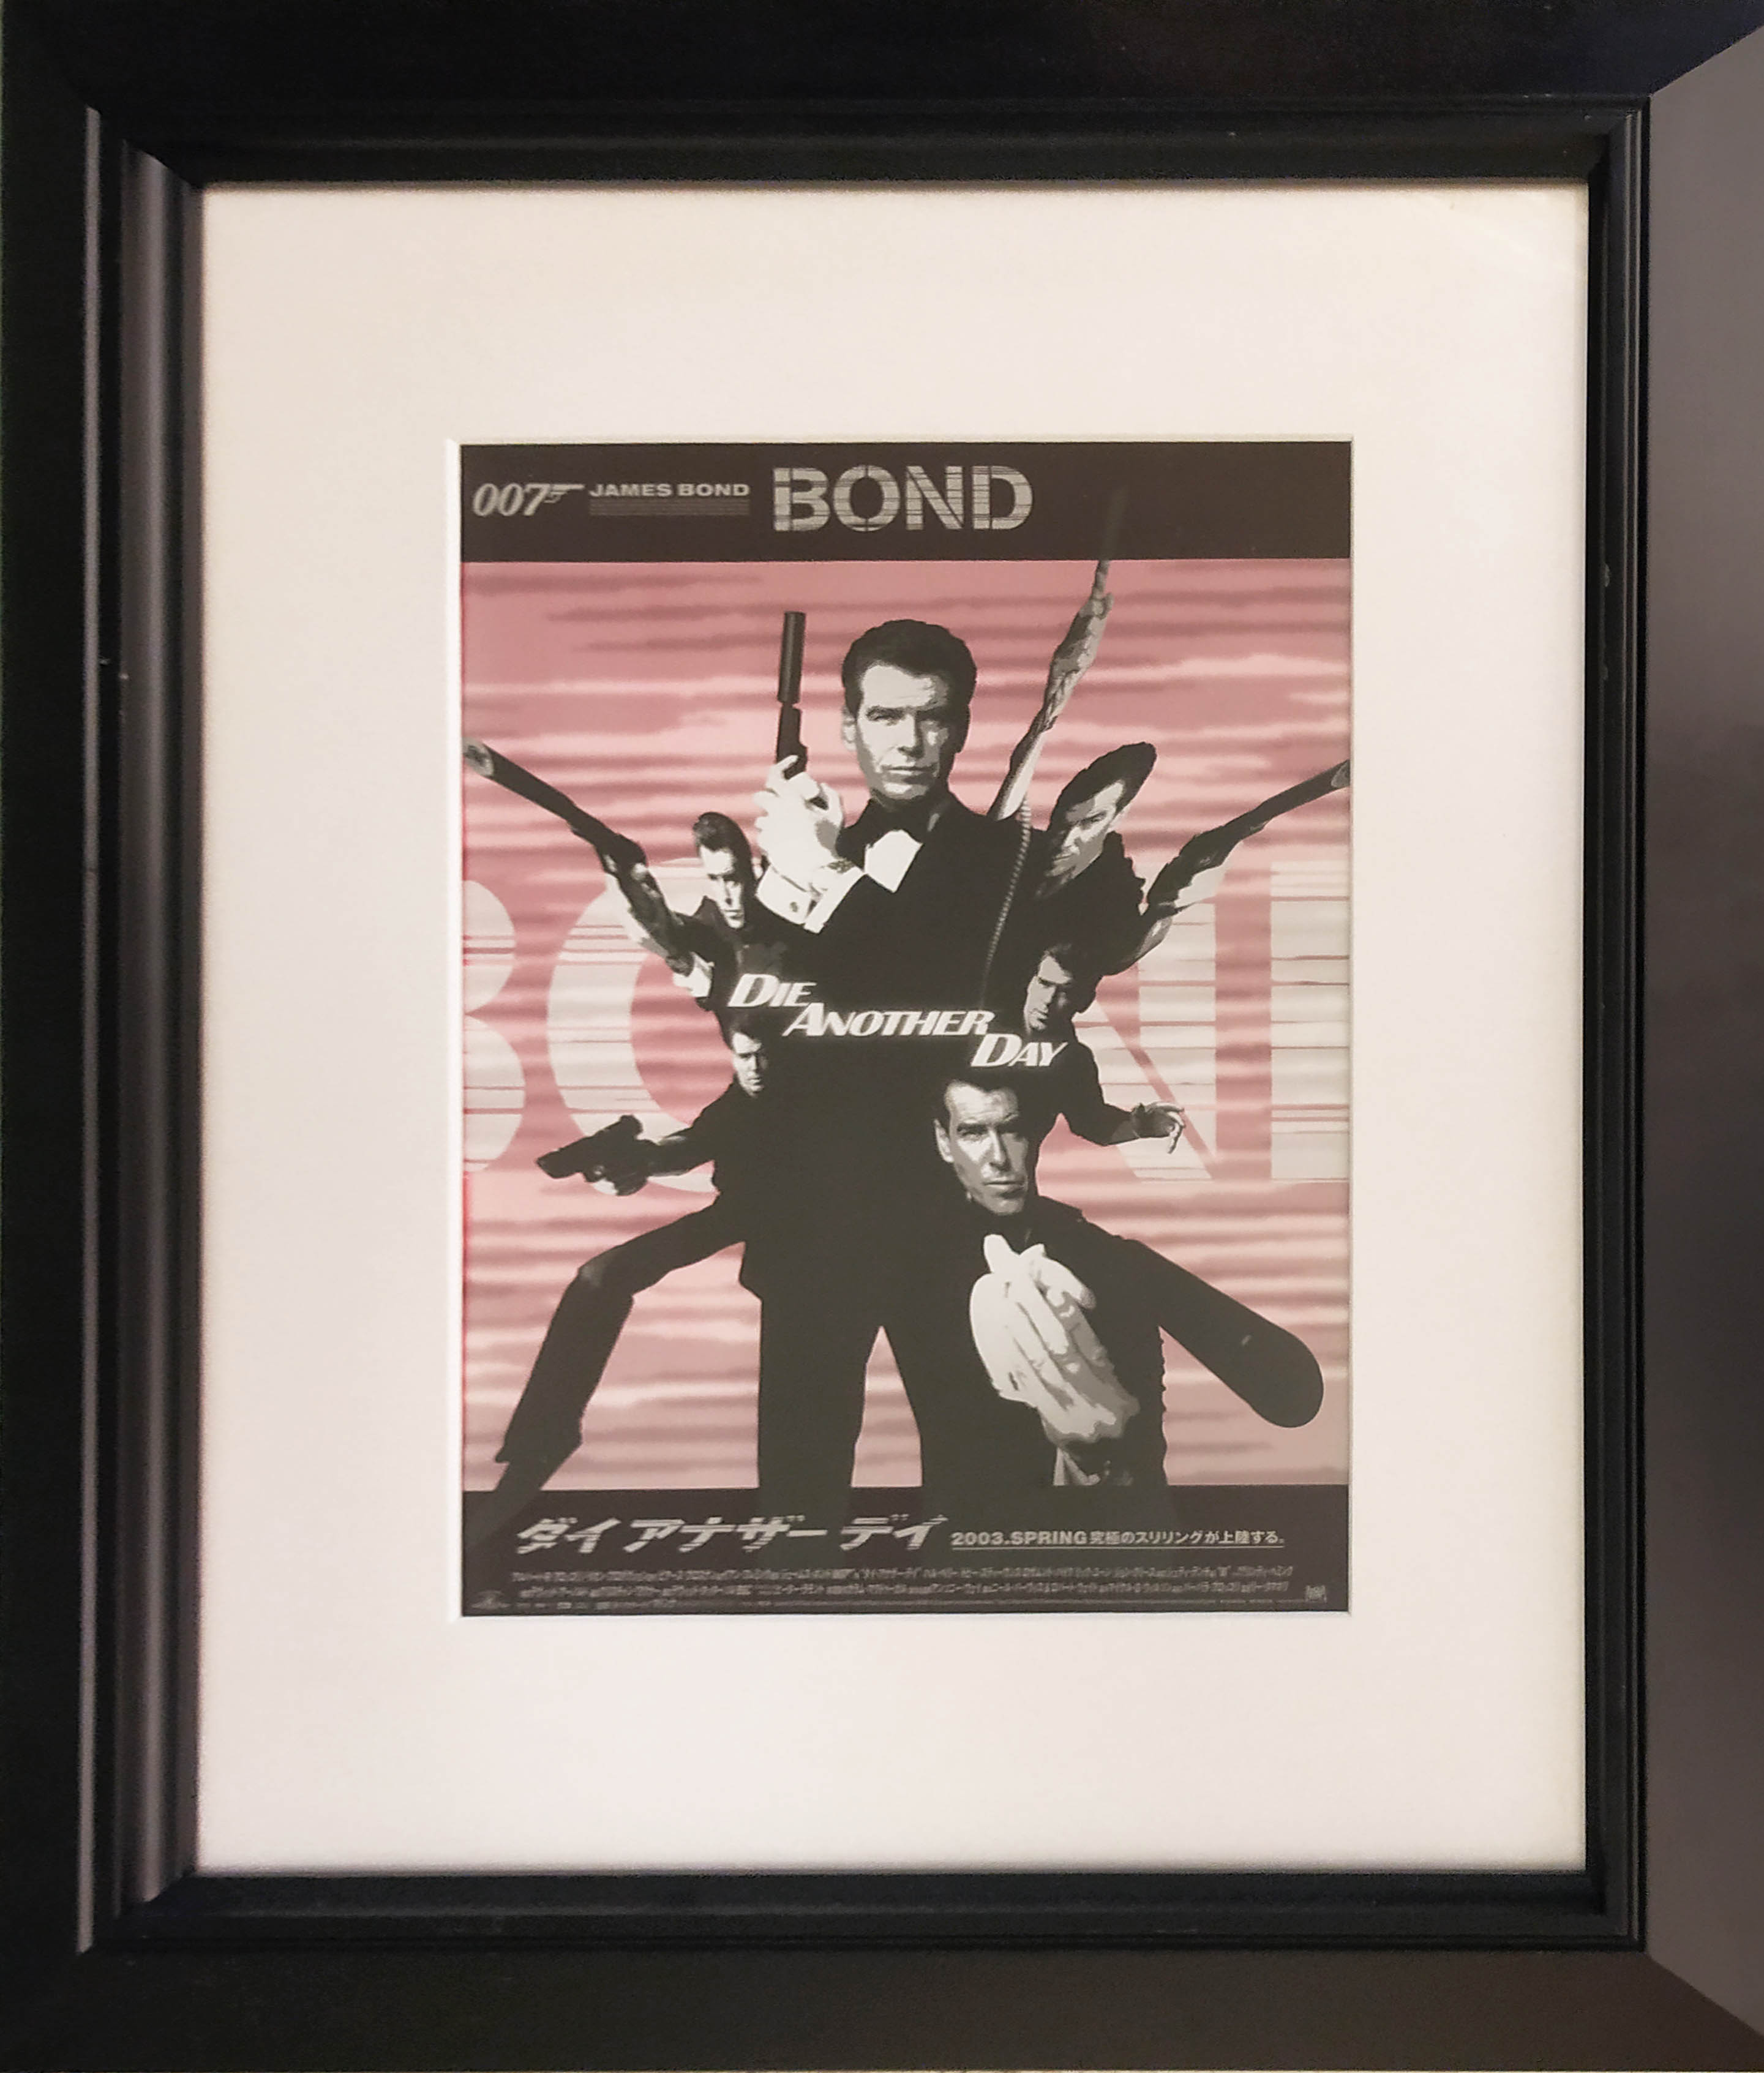 JAMES BOND, united artists MGM & Eon productions 'reproduction offset lithographic film posters', - Image 3 of 13